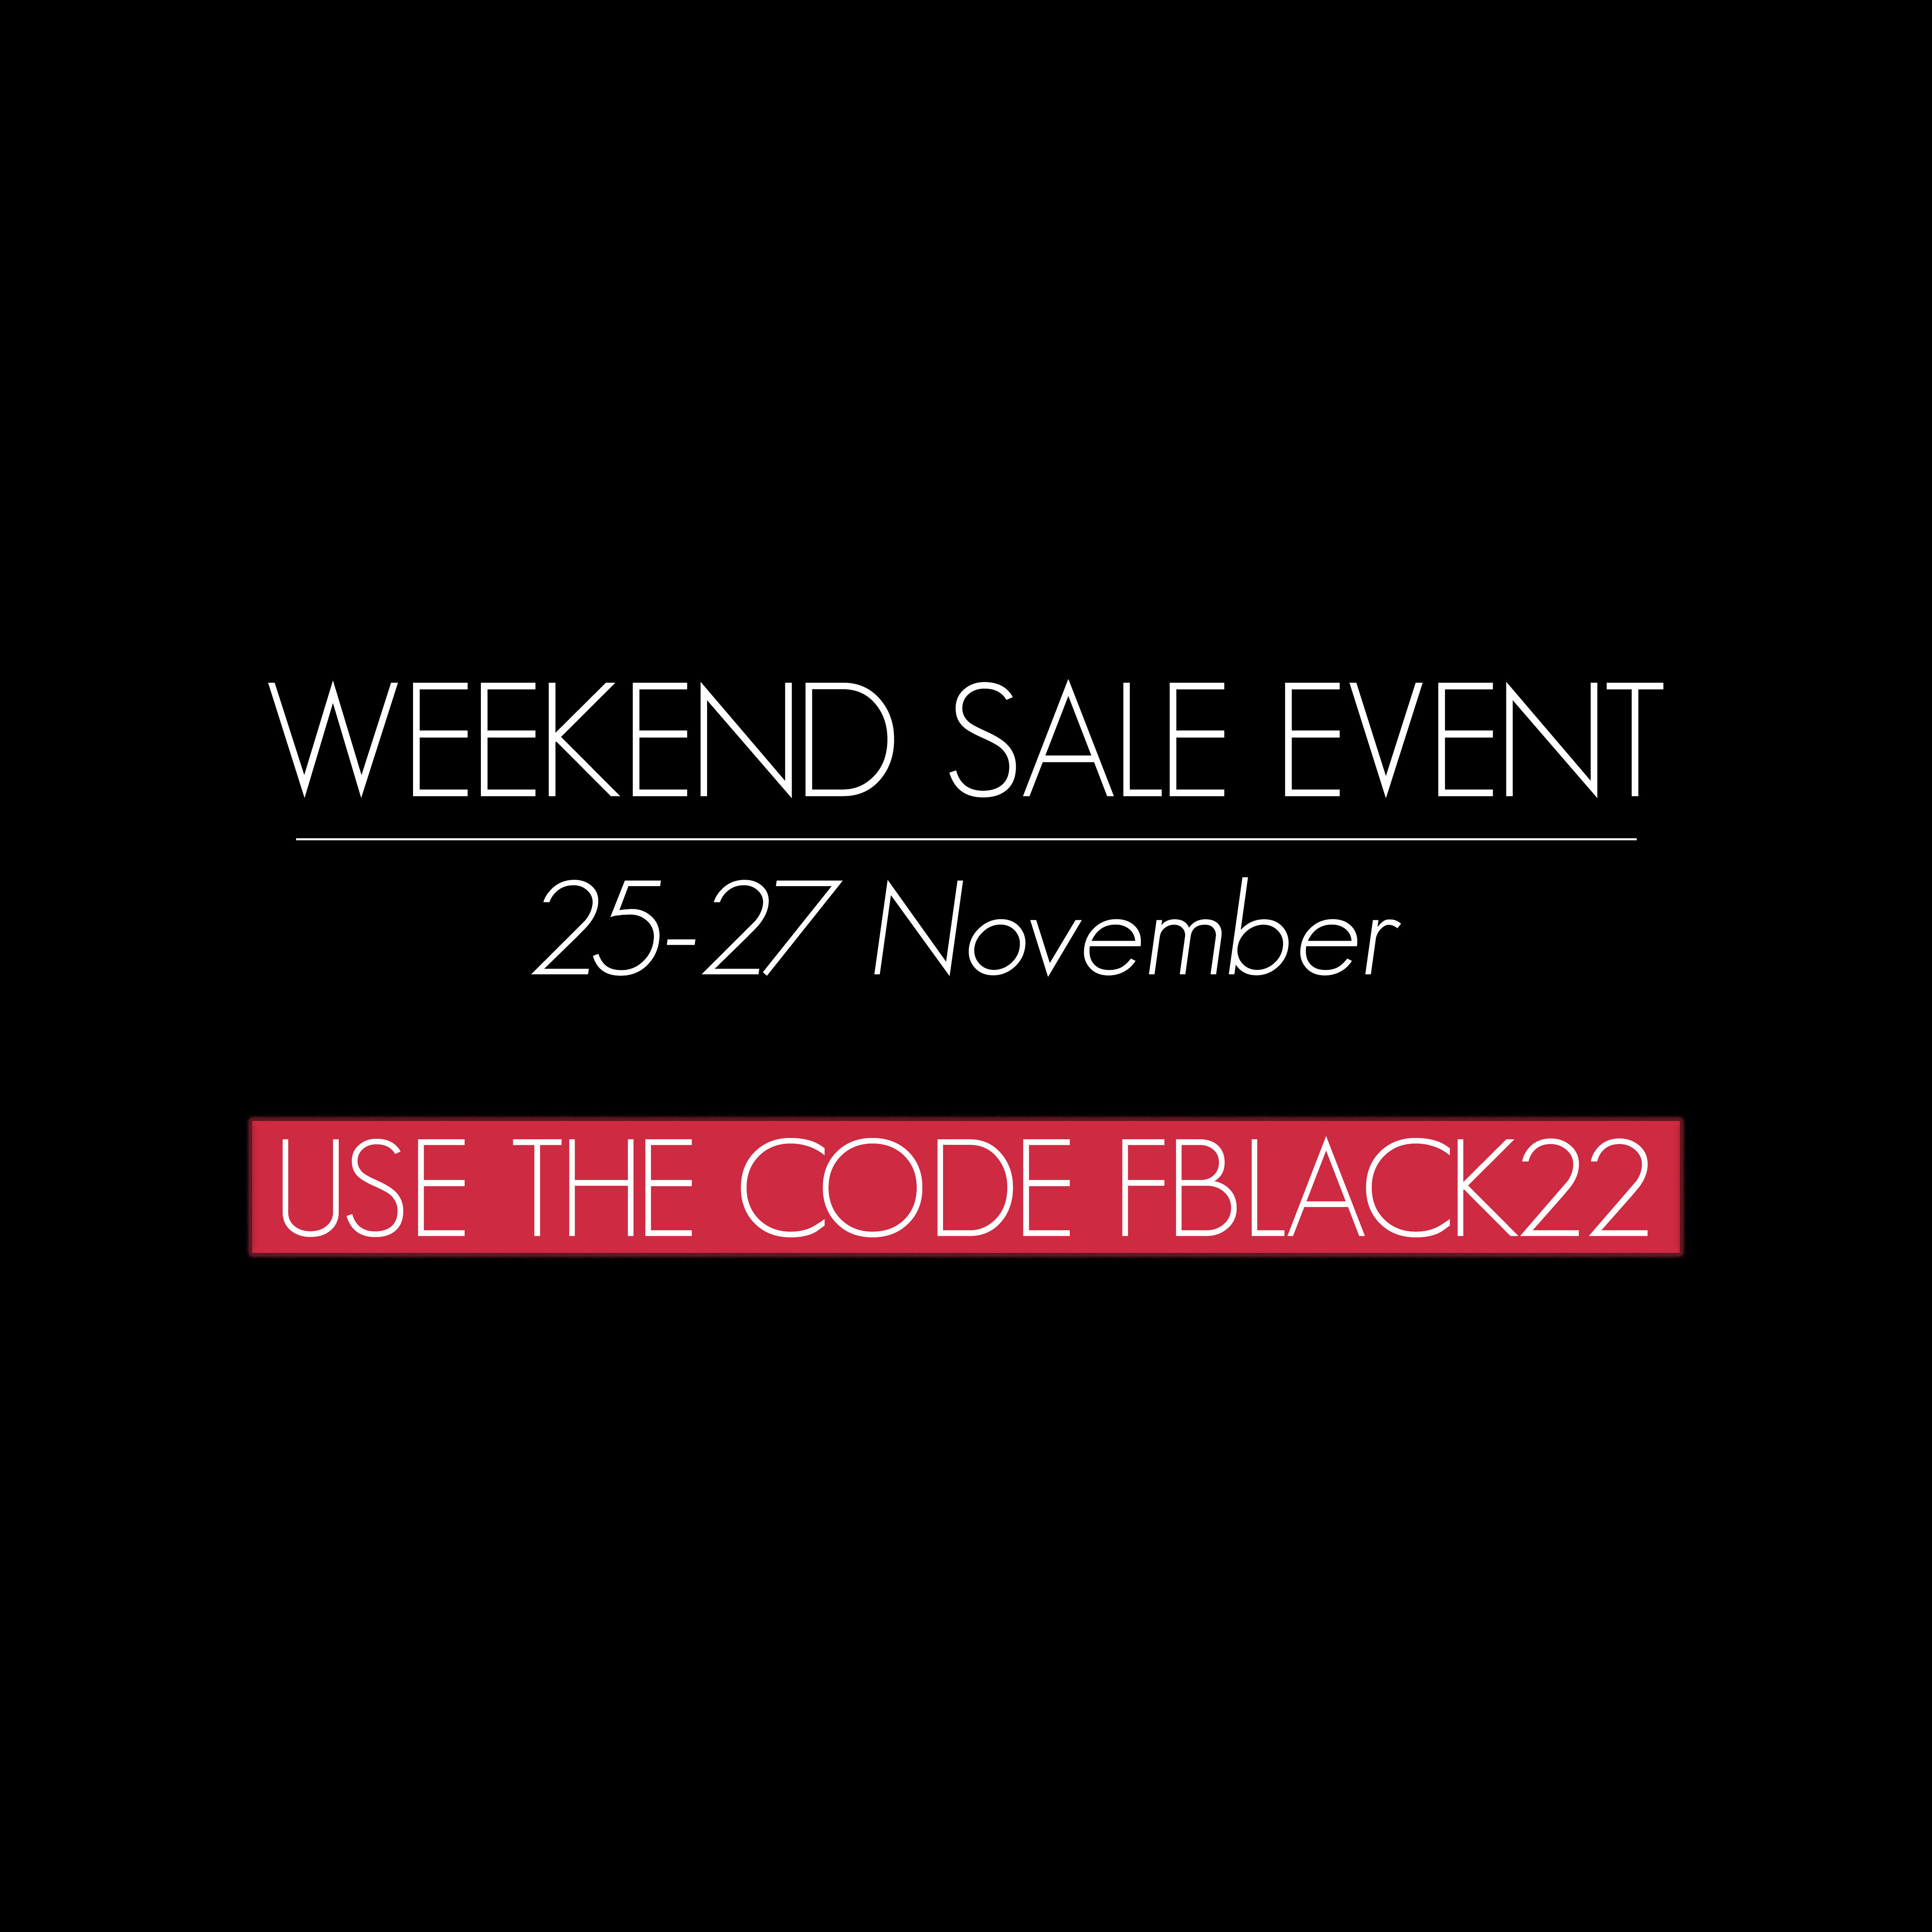 BLACK FRIDAY is here! 